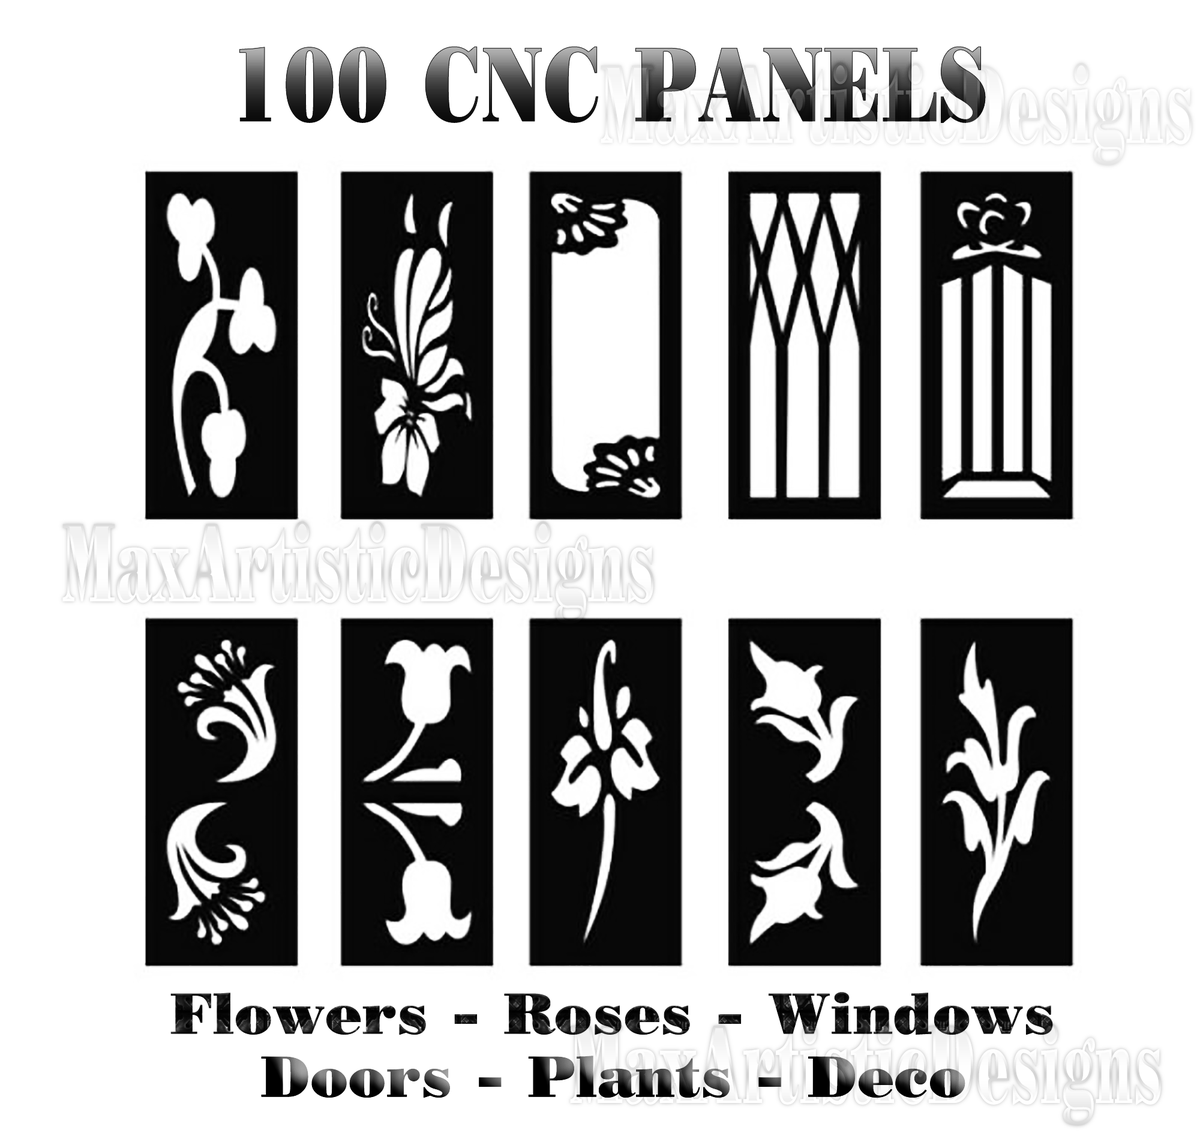 90+ cnc vector panels with flowers, trees geometric frames for doors dxf-cdr format tested in cnc - Download tinyurl.com/2xte75q7